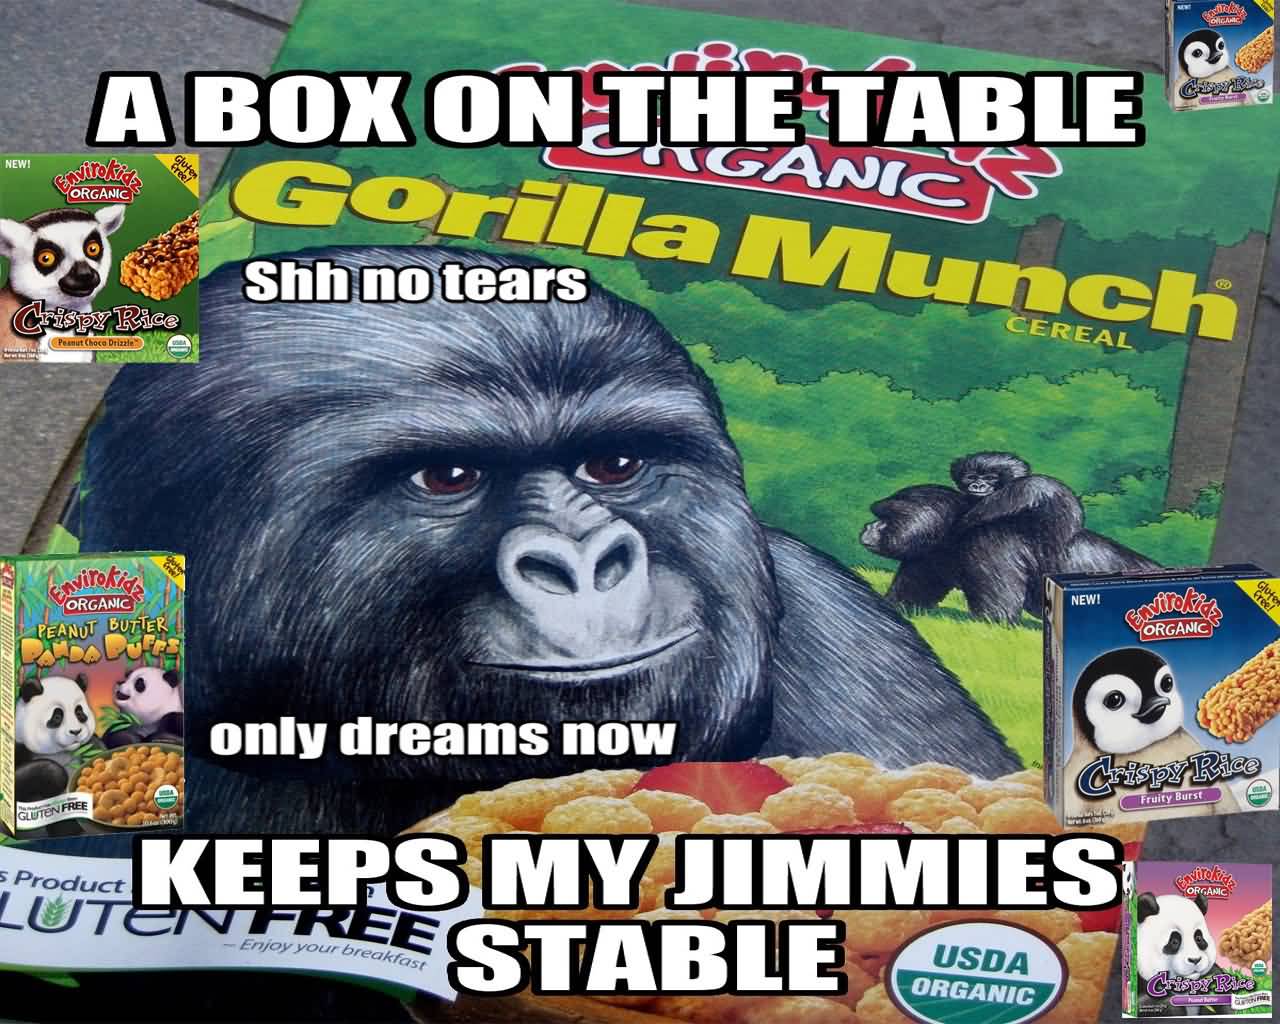 15 Top Gorilla Munch Meme Images and Funny Jokes